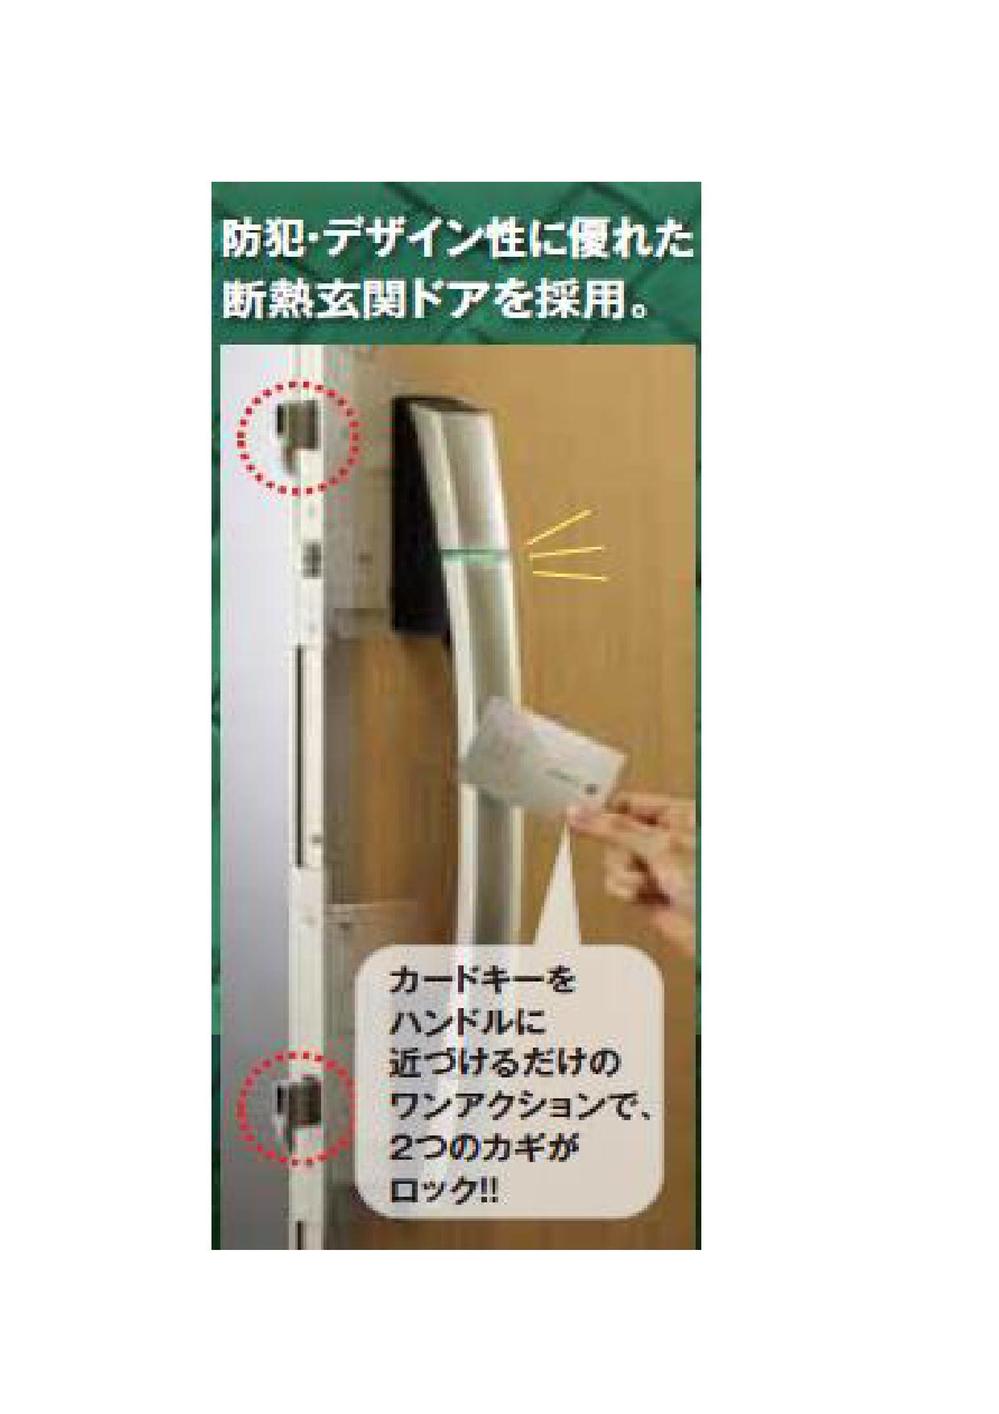 Other Equipment. Crime prevention ・ Excellent thermal insulation entrance door to the design of